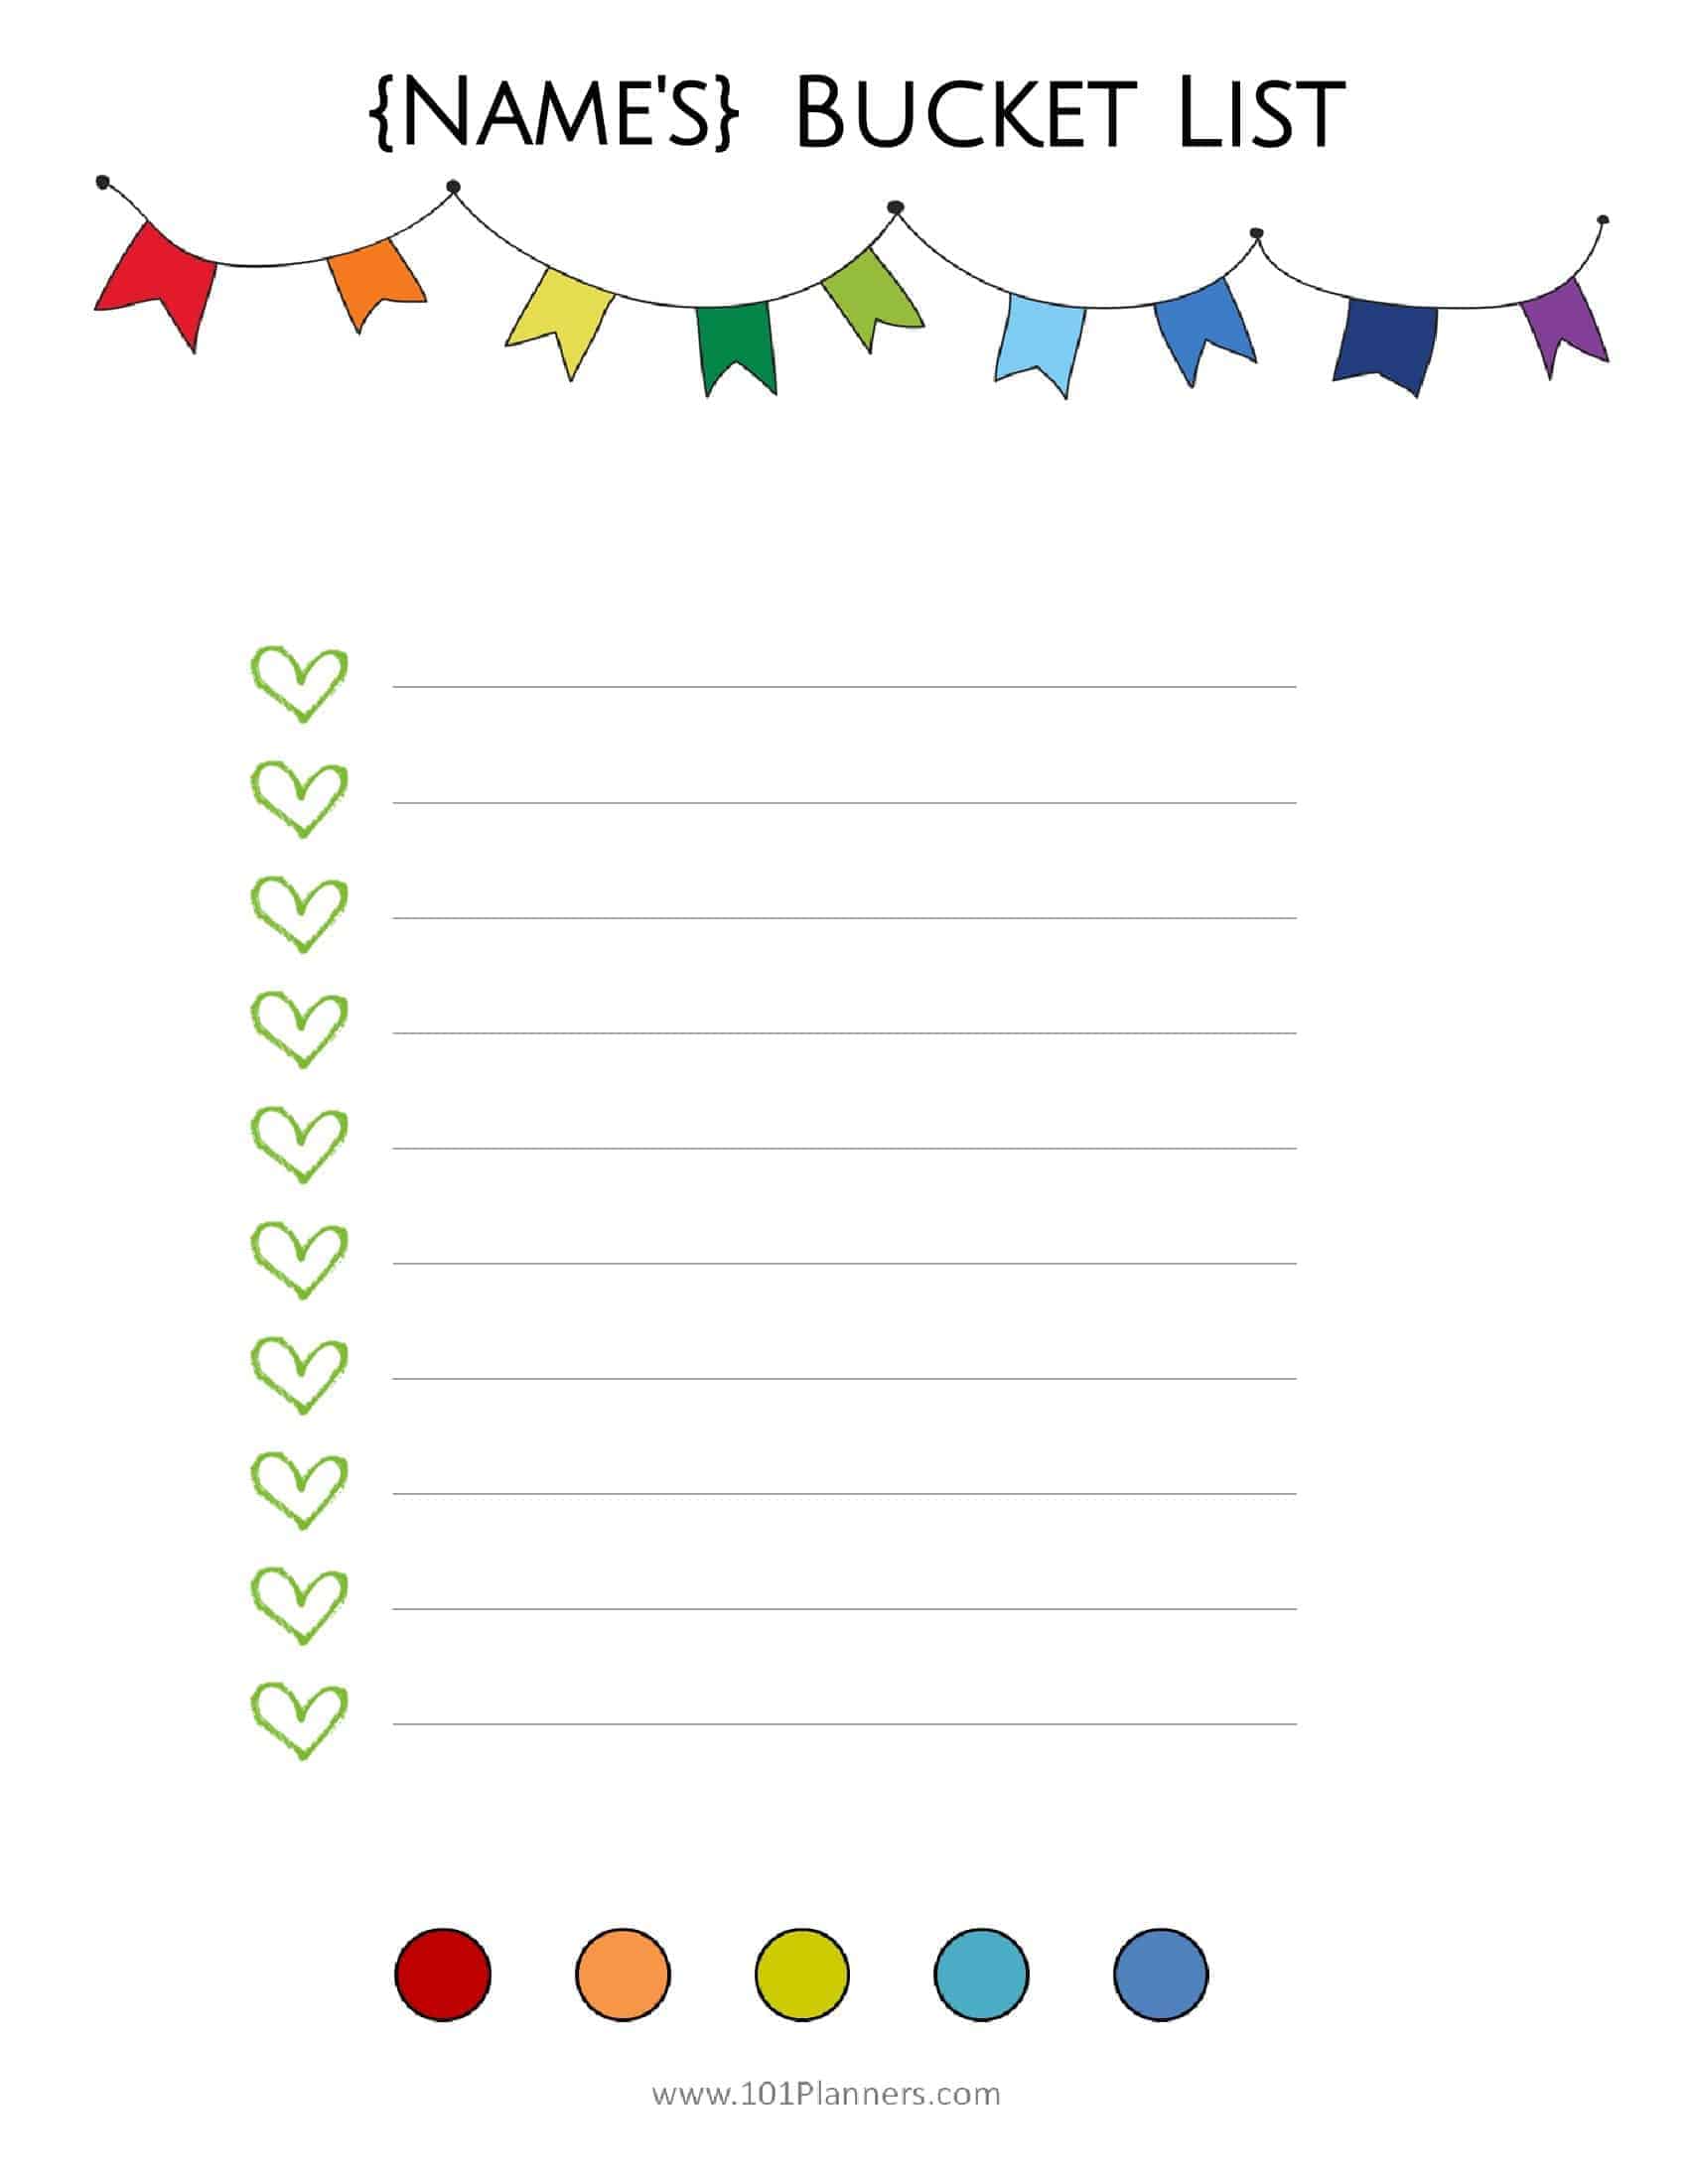 Free Bucket List Printable Customize Online Print at Home